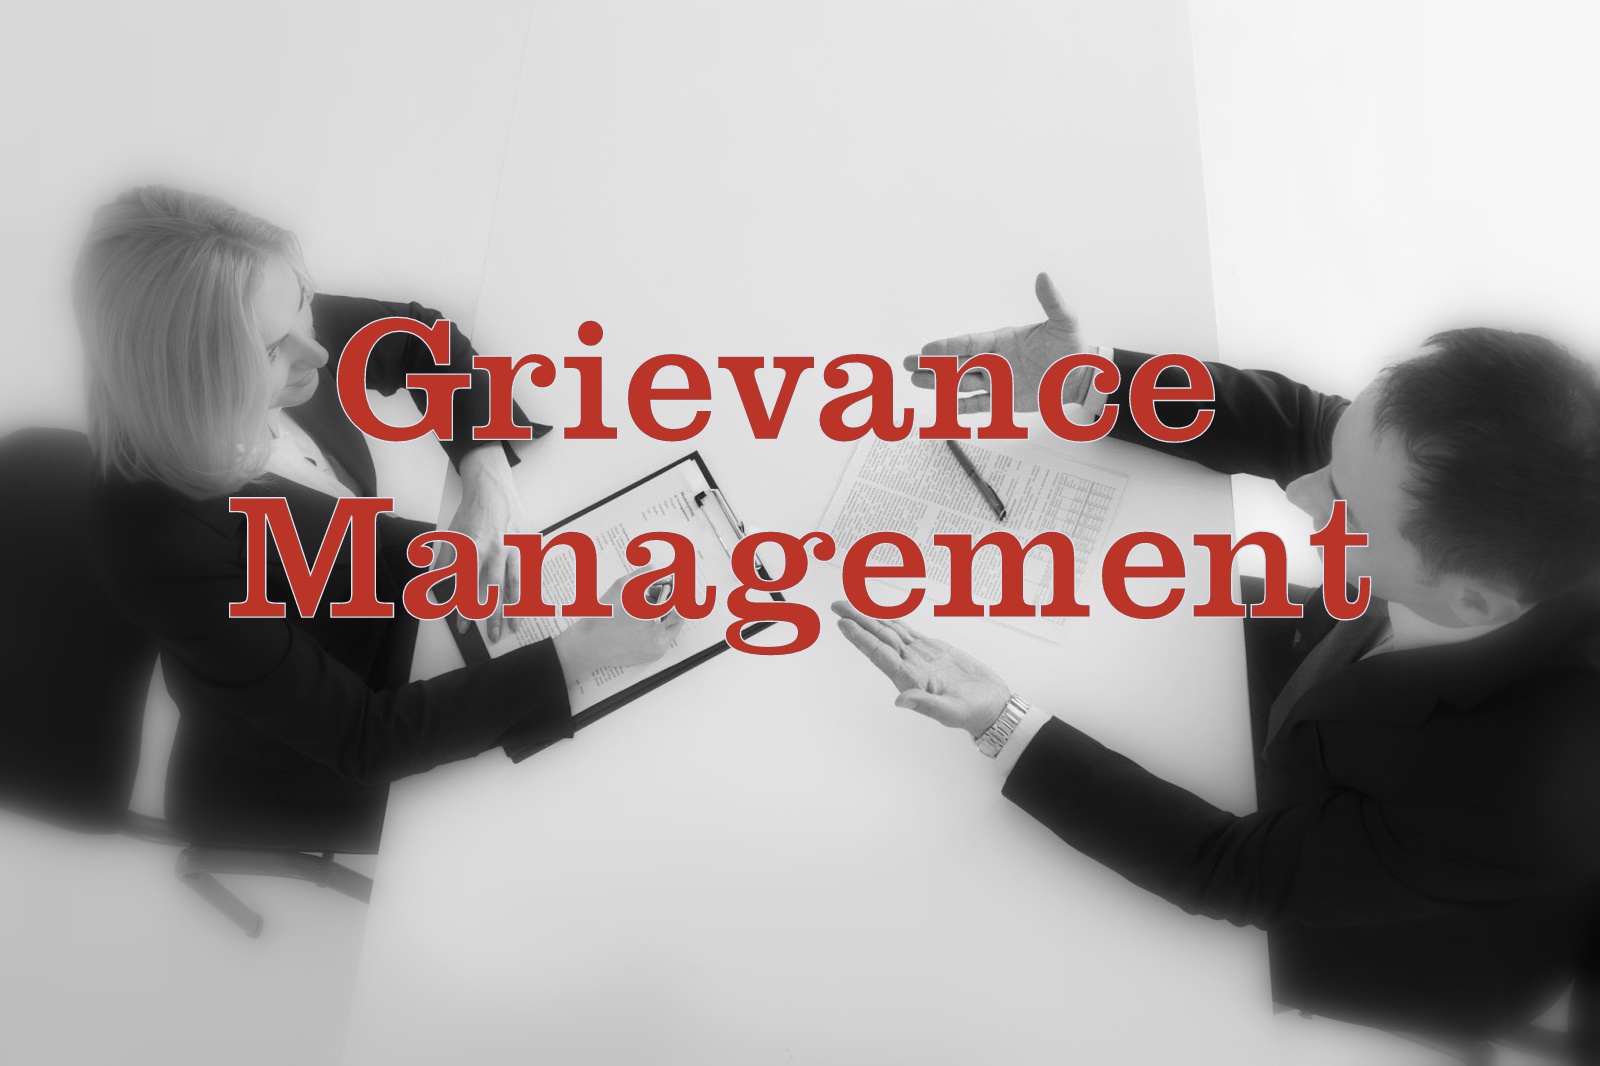 Grievance Management – Meaning, Definitions, Features, Causes, Effects and Procedure